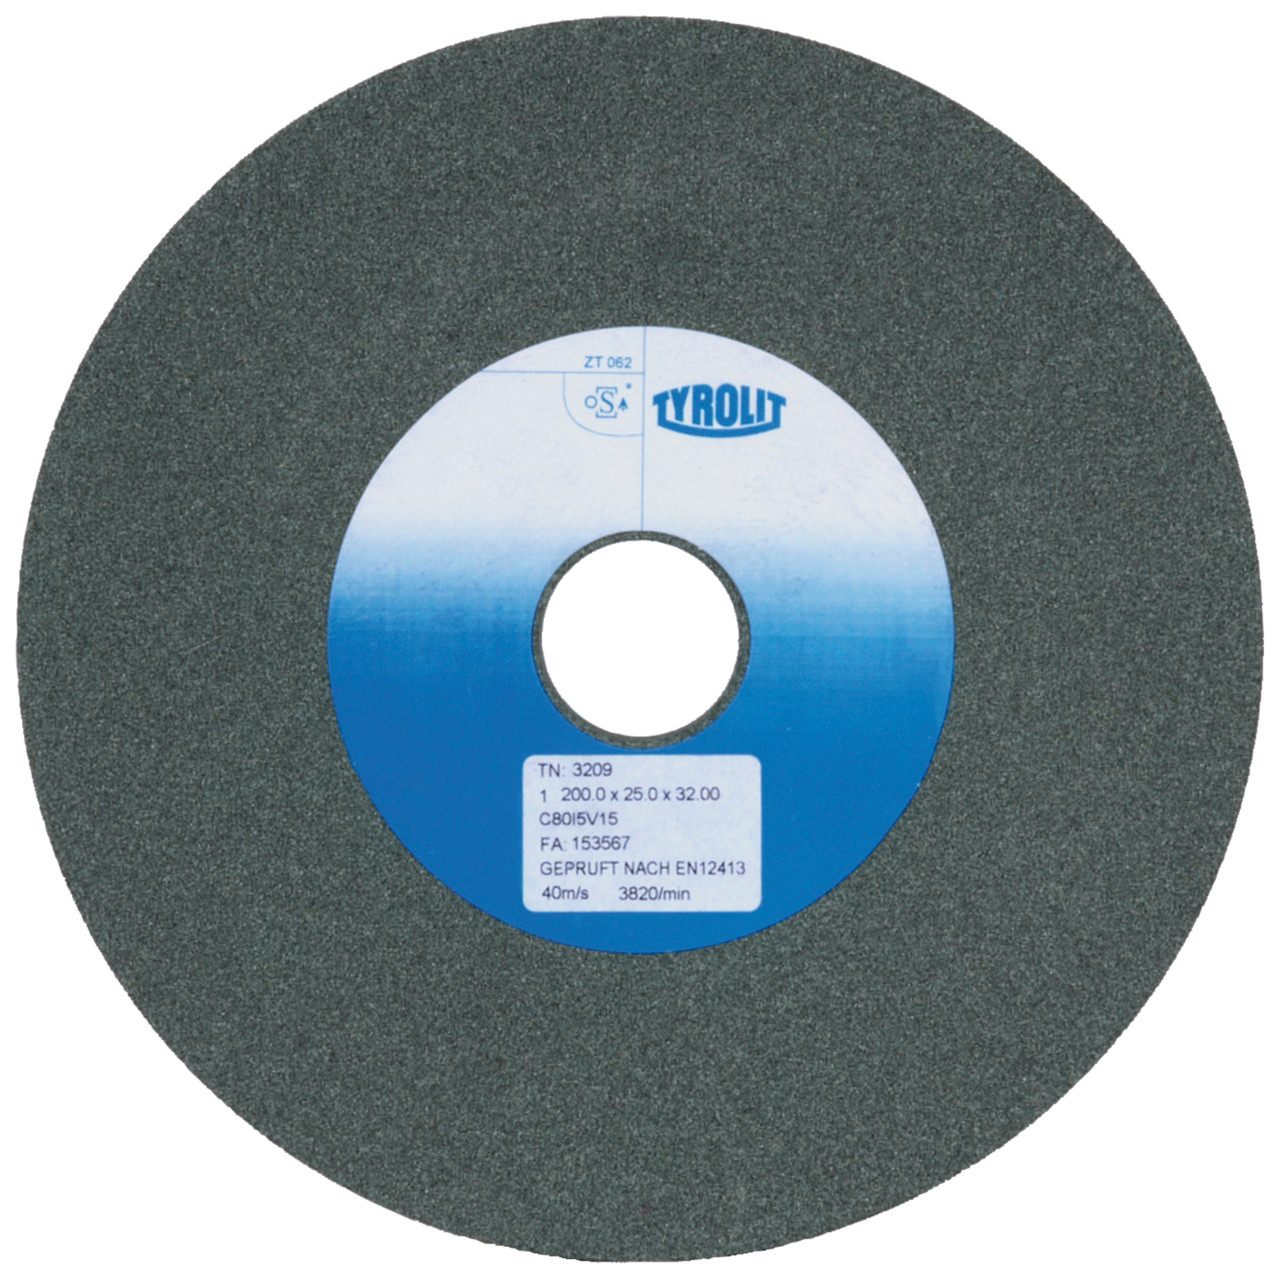 TYROLIT conventional ceramic grinding wheels DxDxH 250x32x51 For carbide and cast iron, shape: 1, Art. 822623